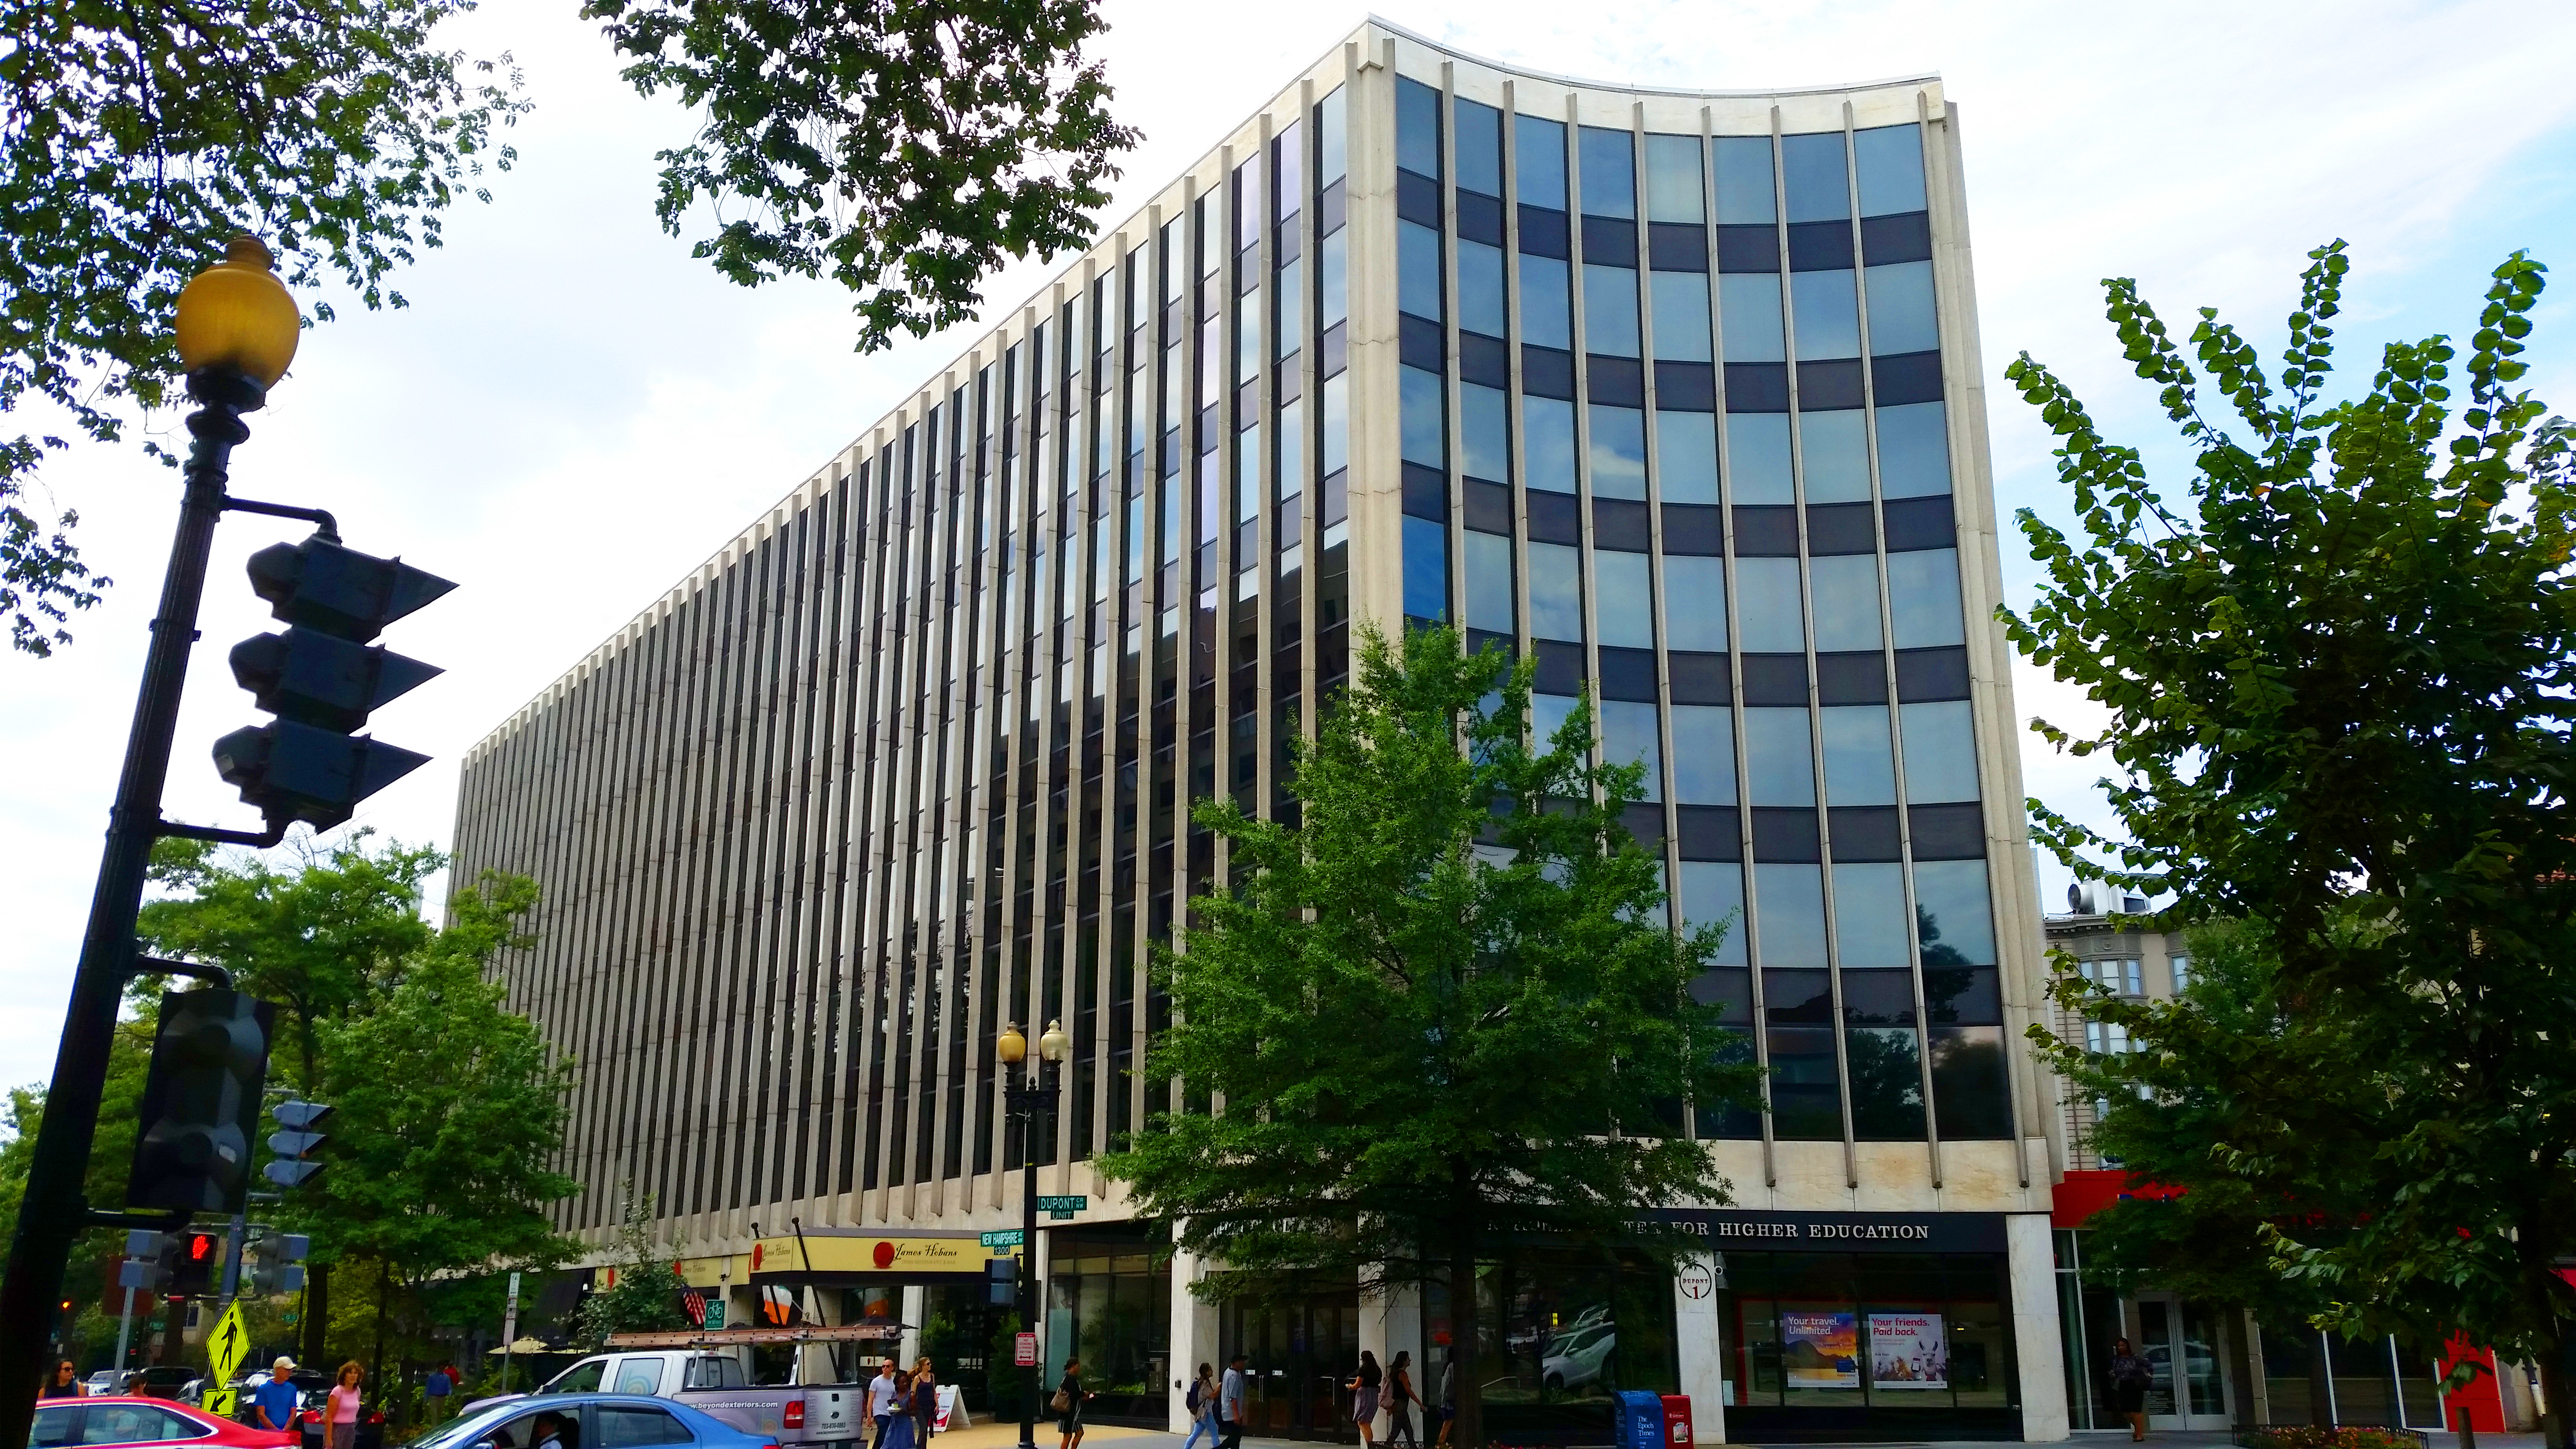 Picture of the National Center for Higher Education at 1 Dupont Circle, NW, Washington, DC.